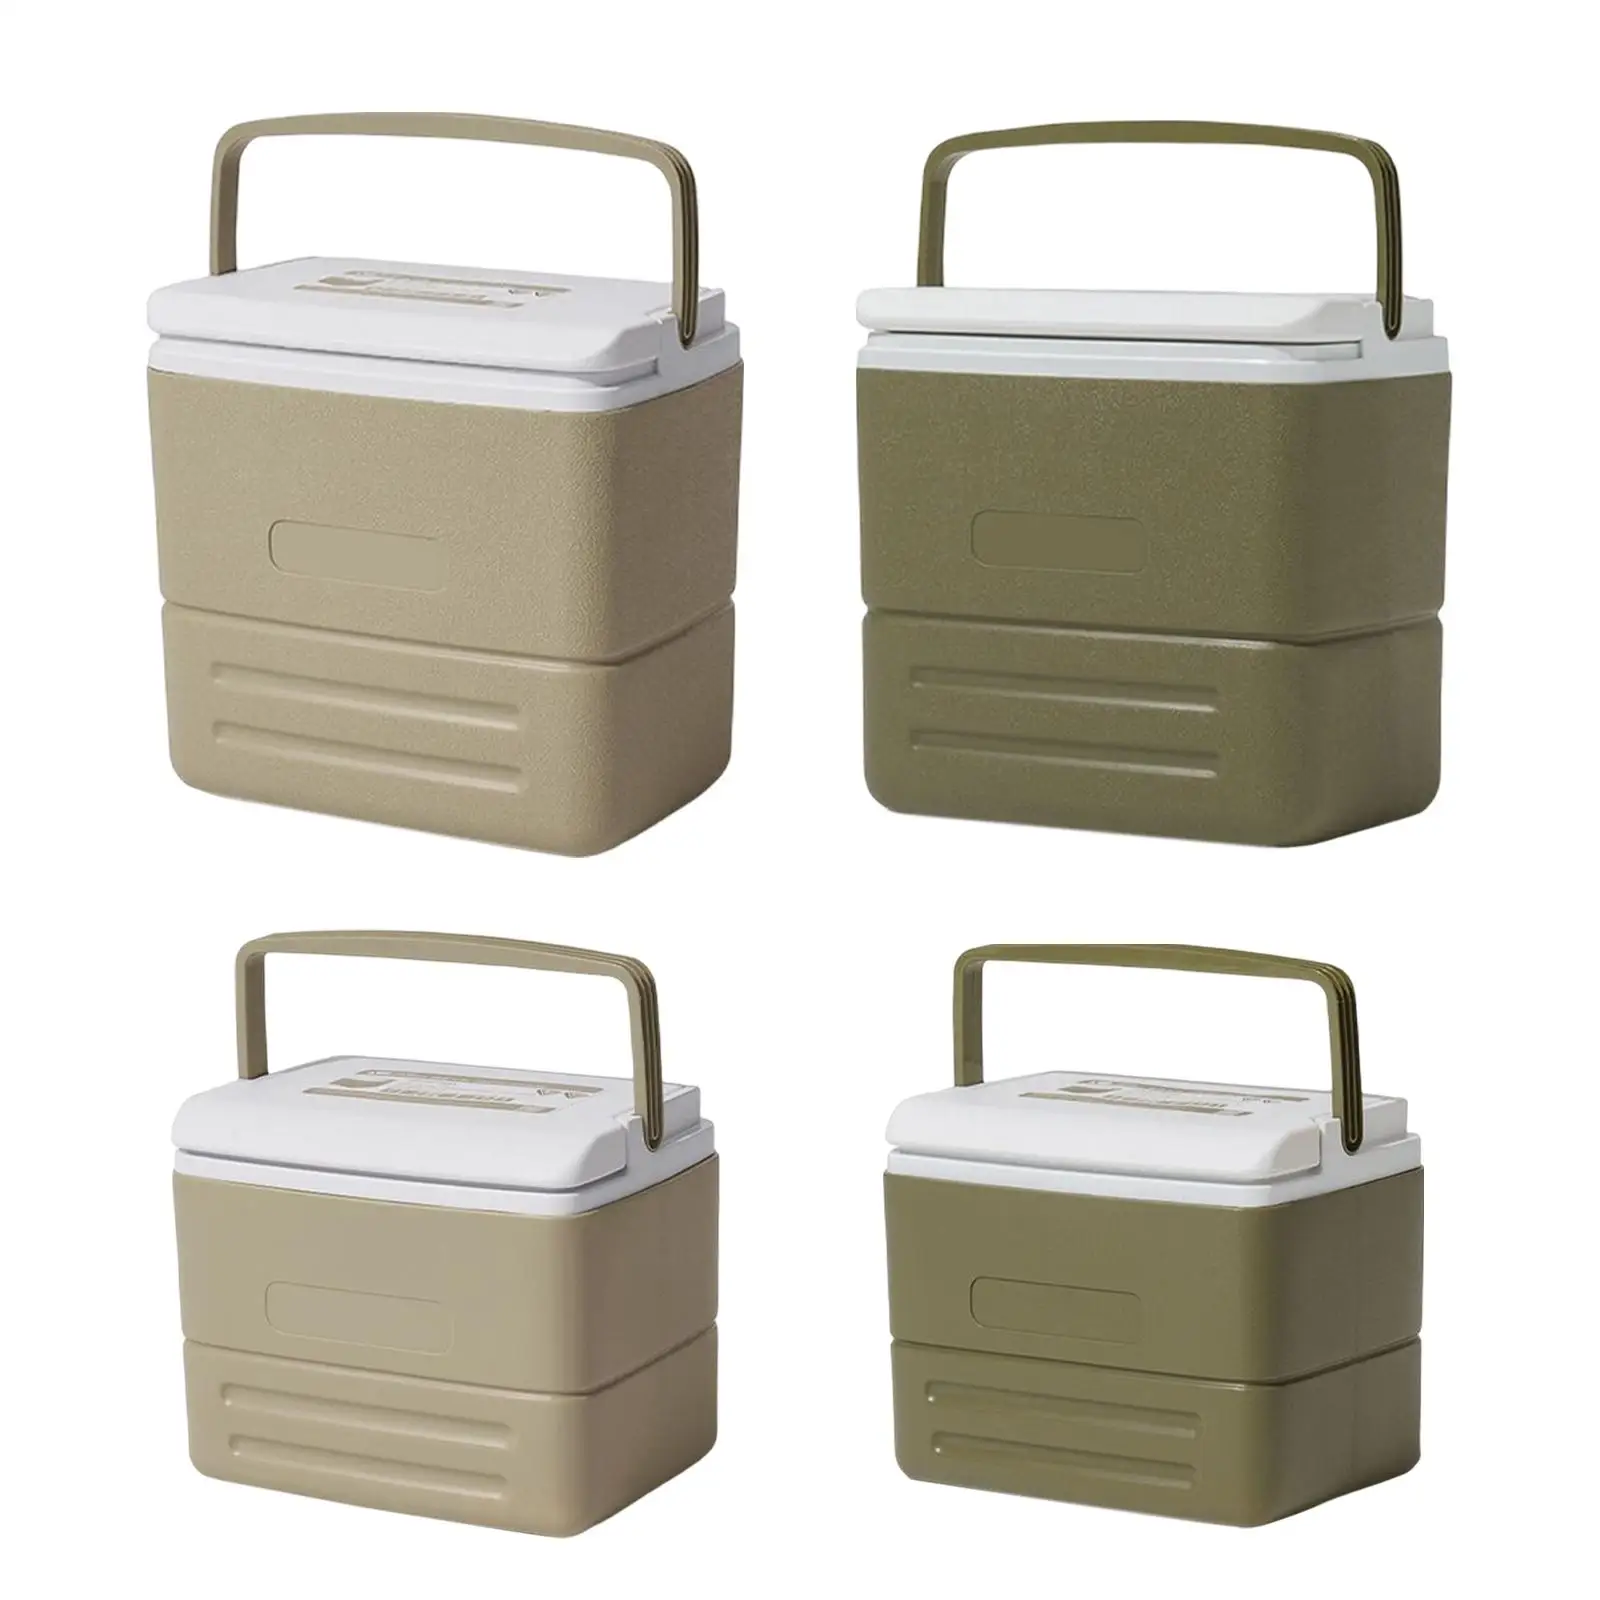 Portable Insulated Thermal Food Warm Storage Food Delivery Cooler Bag Lunch Box for BBQ Car Transportation Boat